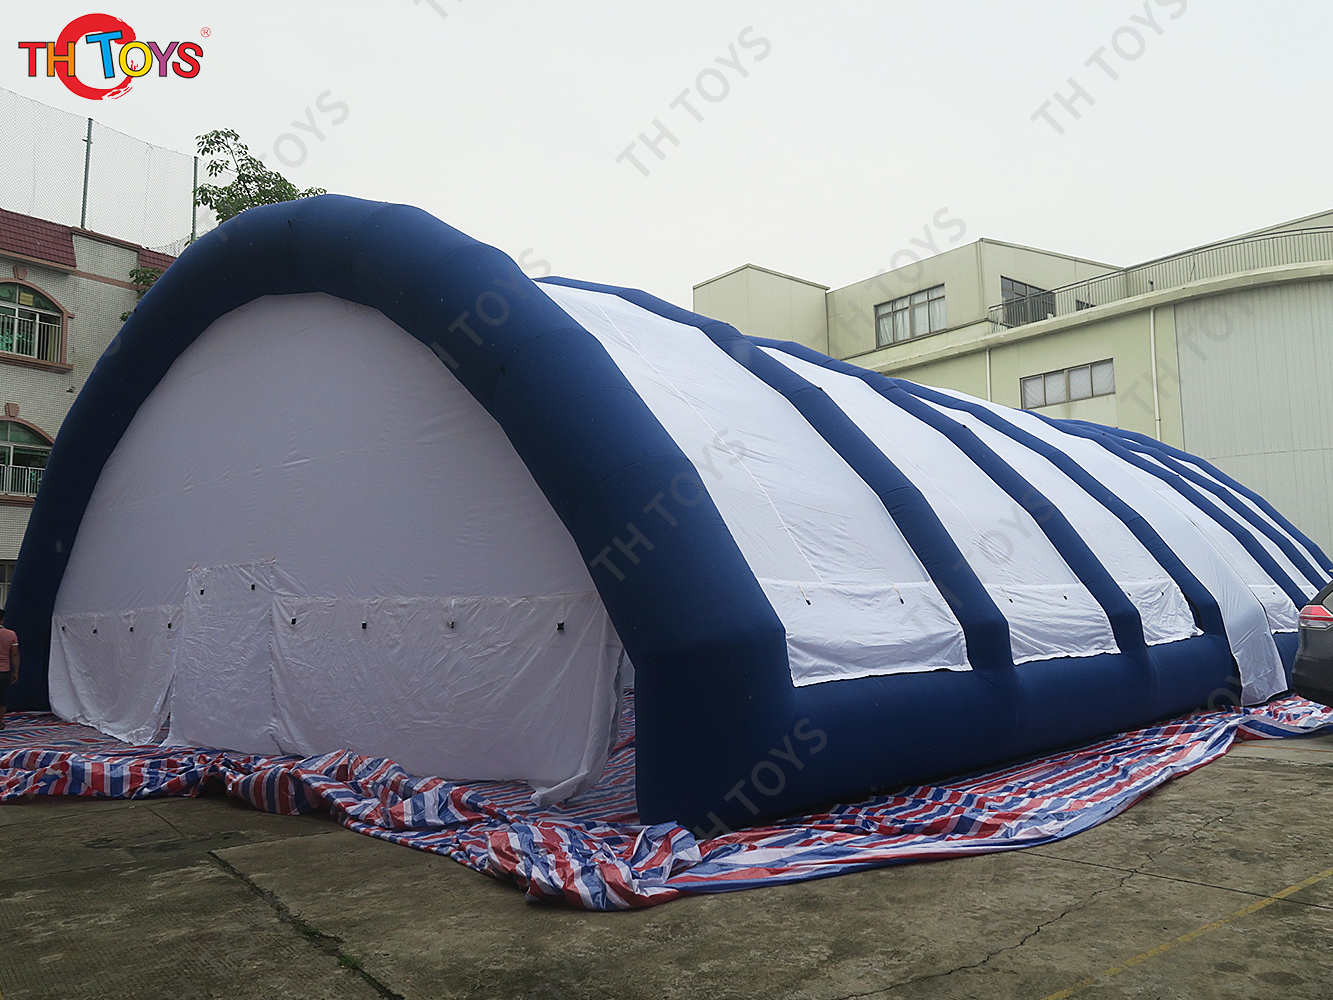 Giant Inflatable Lawn Dome Tent for Outdoor Party Commercial Tennis Court Sport Tents for Sale